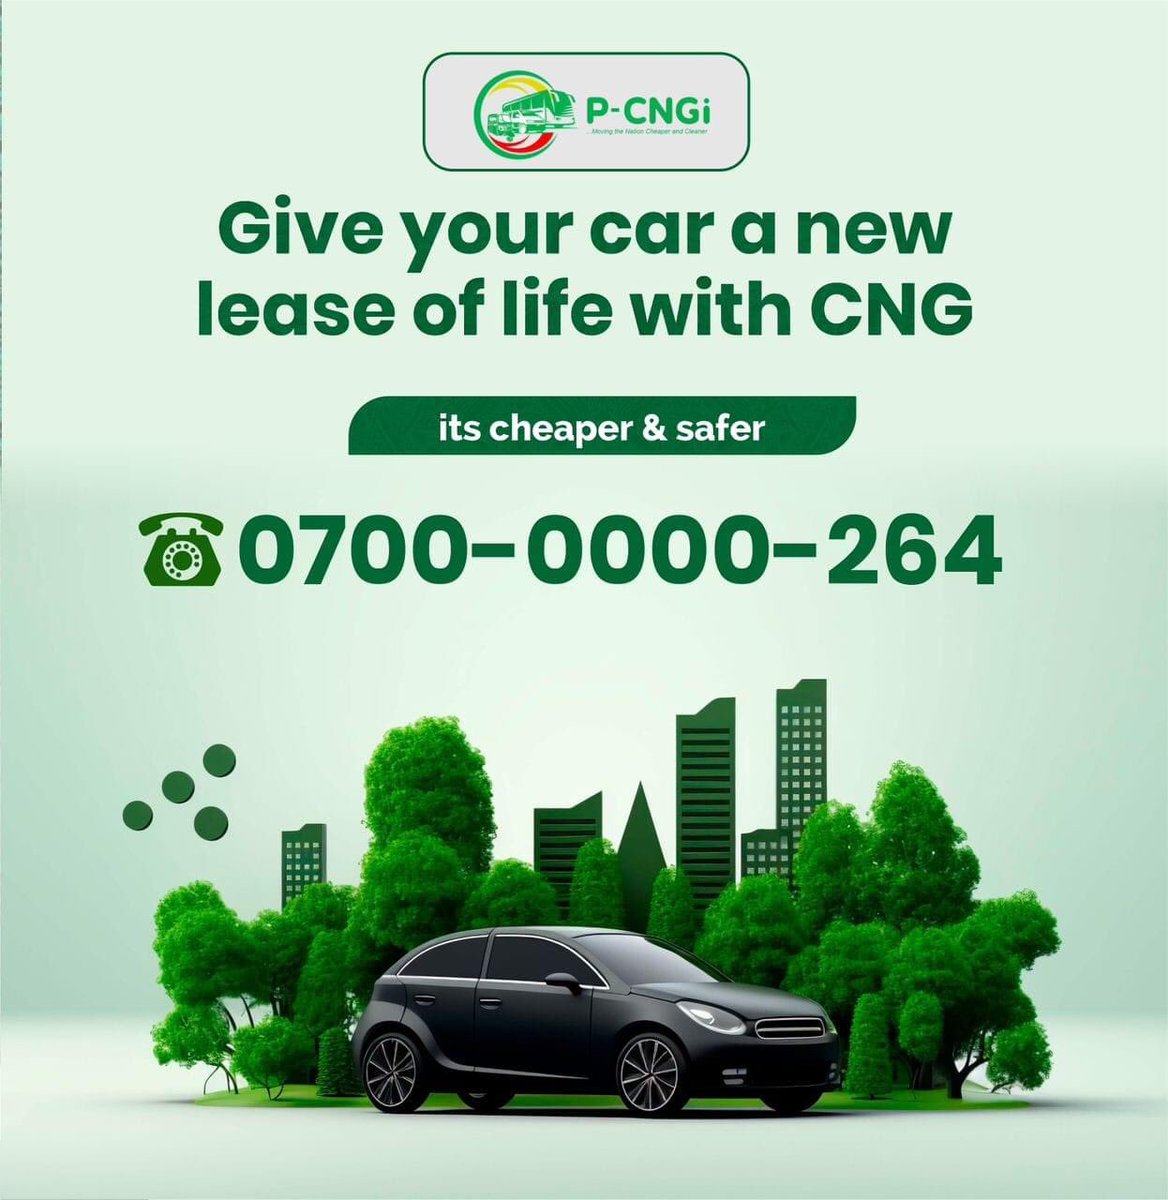 Nigeria is rich in Compressed Natural Gas (CNG), which is different from Liquefied Petroleum Gas (LPG). 

CNG can be found in 30 out of the 36 states of the country. CNG is cheaper and at N230/kg, let us embrace CNG to power our vehicles to reduce pressure PMS. For more info 👇🏽